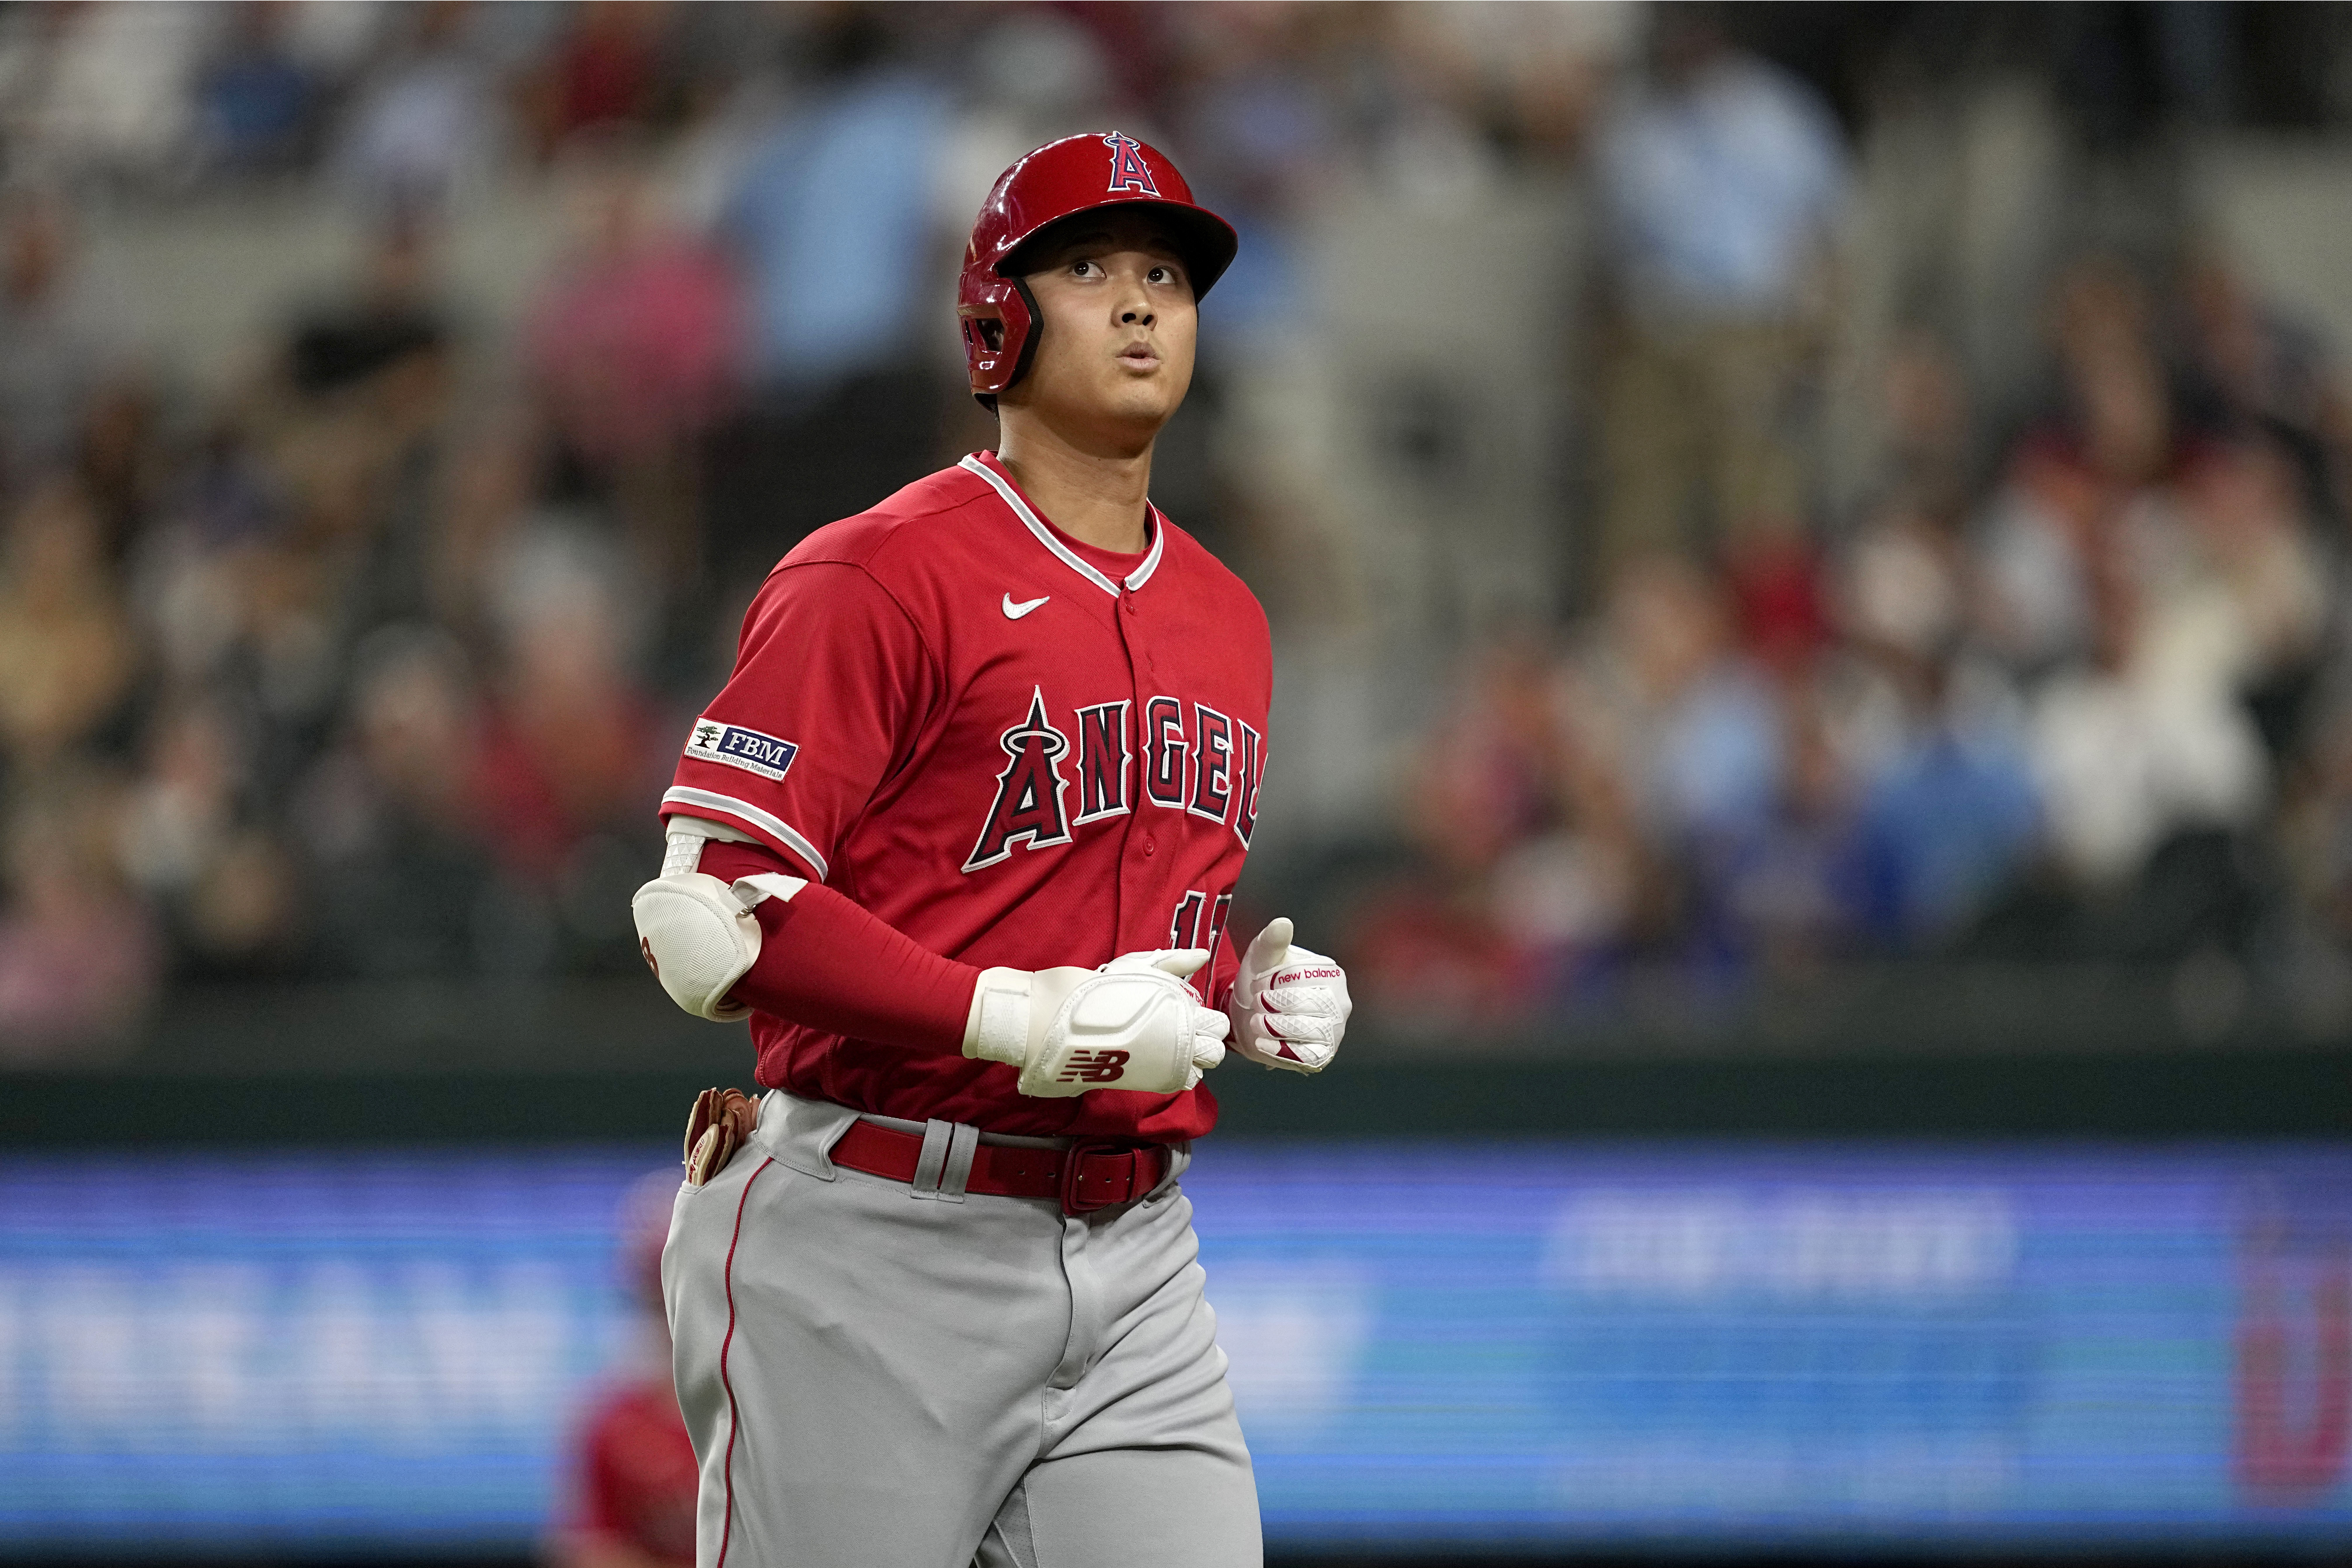 Angels star Shohei Ohtani signs endorsement deal with New Balance